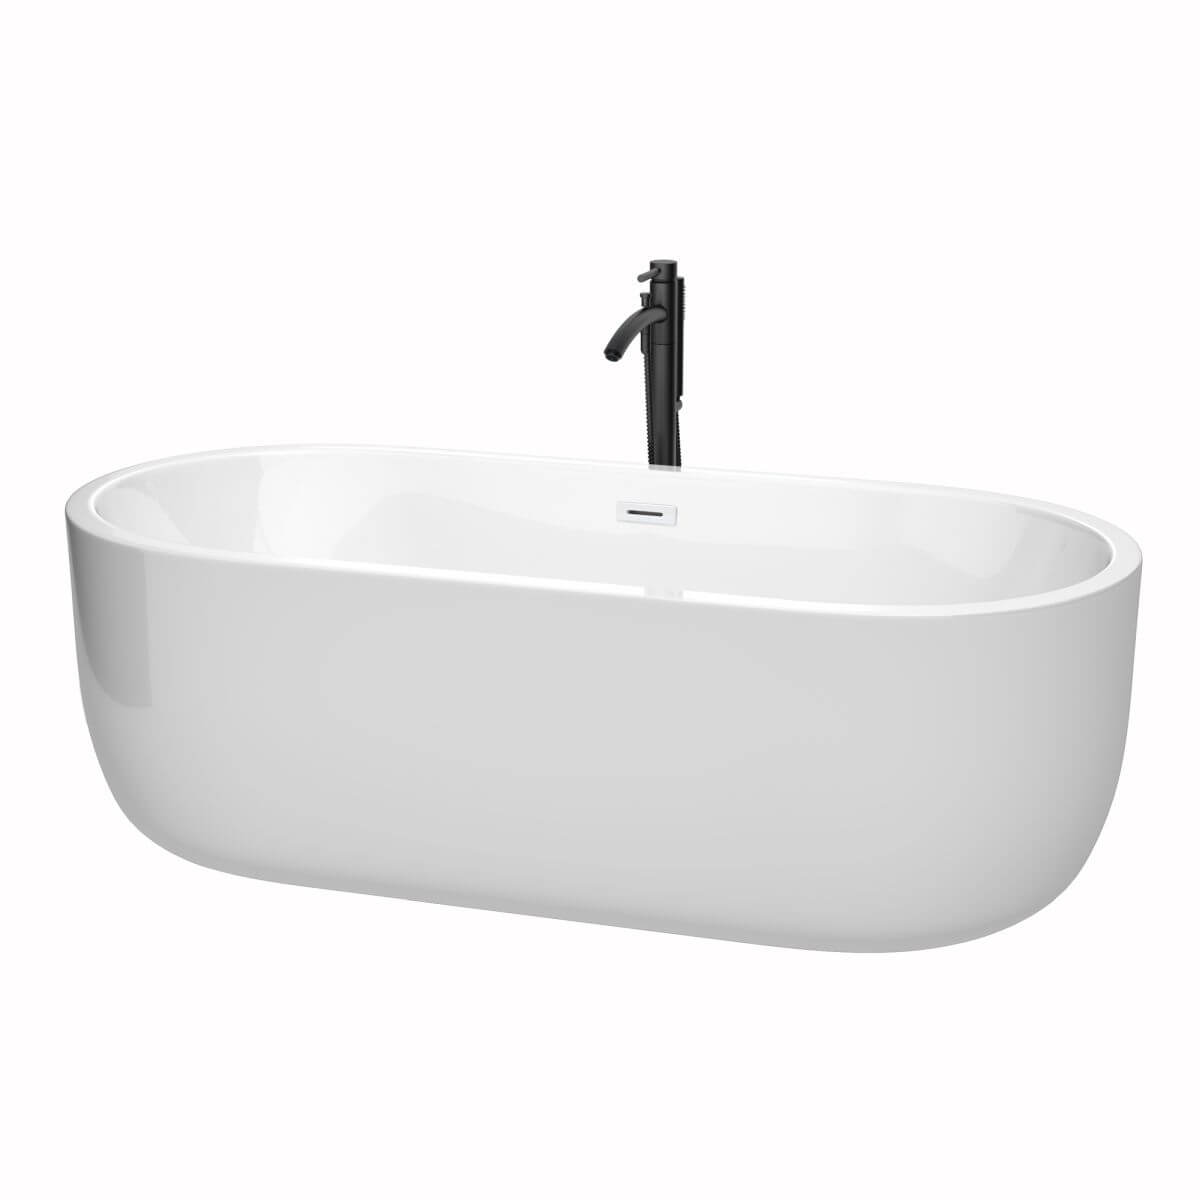 Wyndham Collection Juliette 71 inch Freestanding Bathtub in White with Shiny White Trim and Floor Mounted Faucet in Matte Black - WCOBT101371SWATPBK